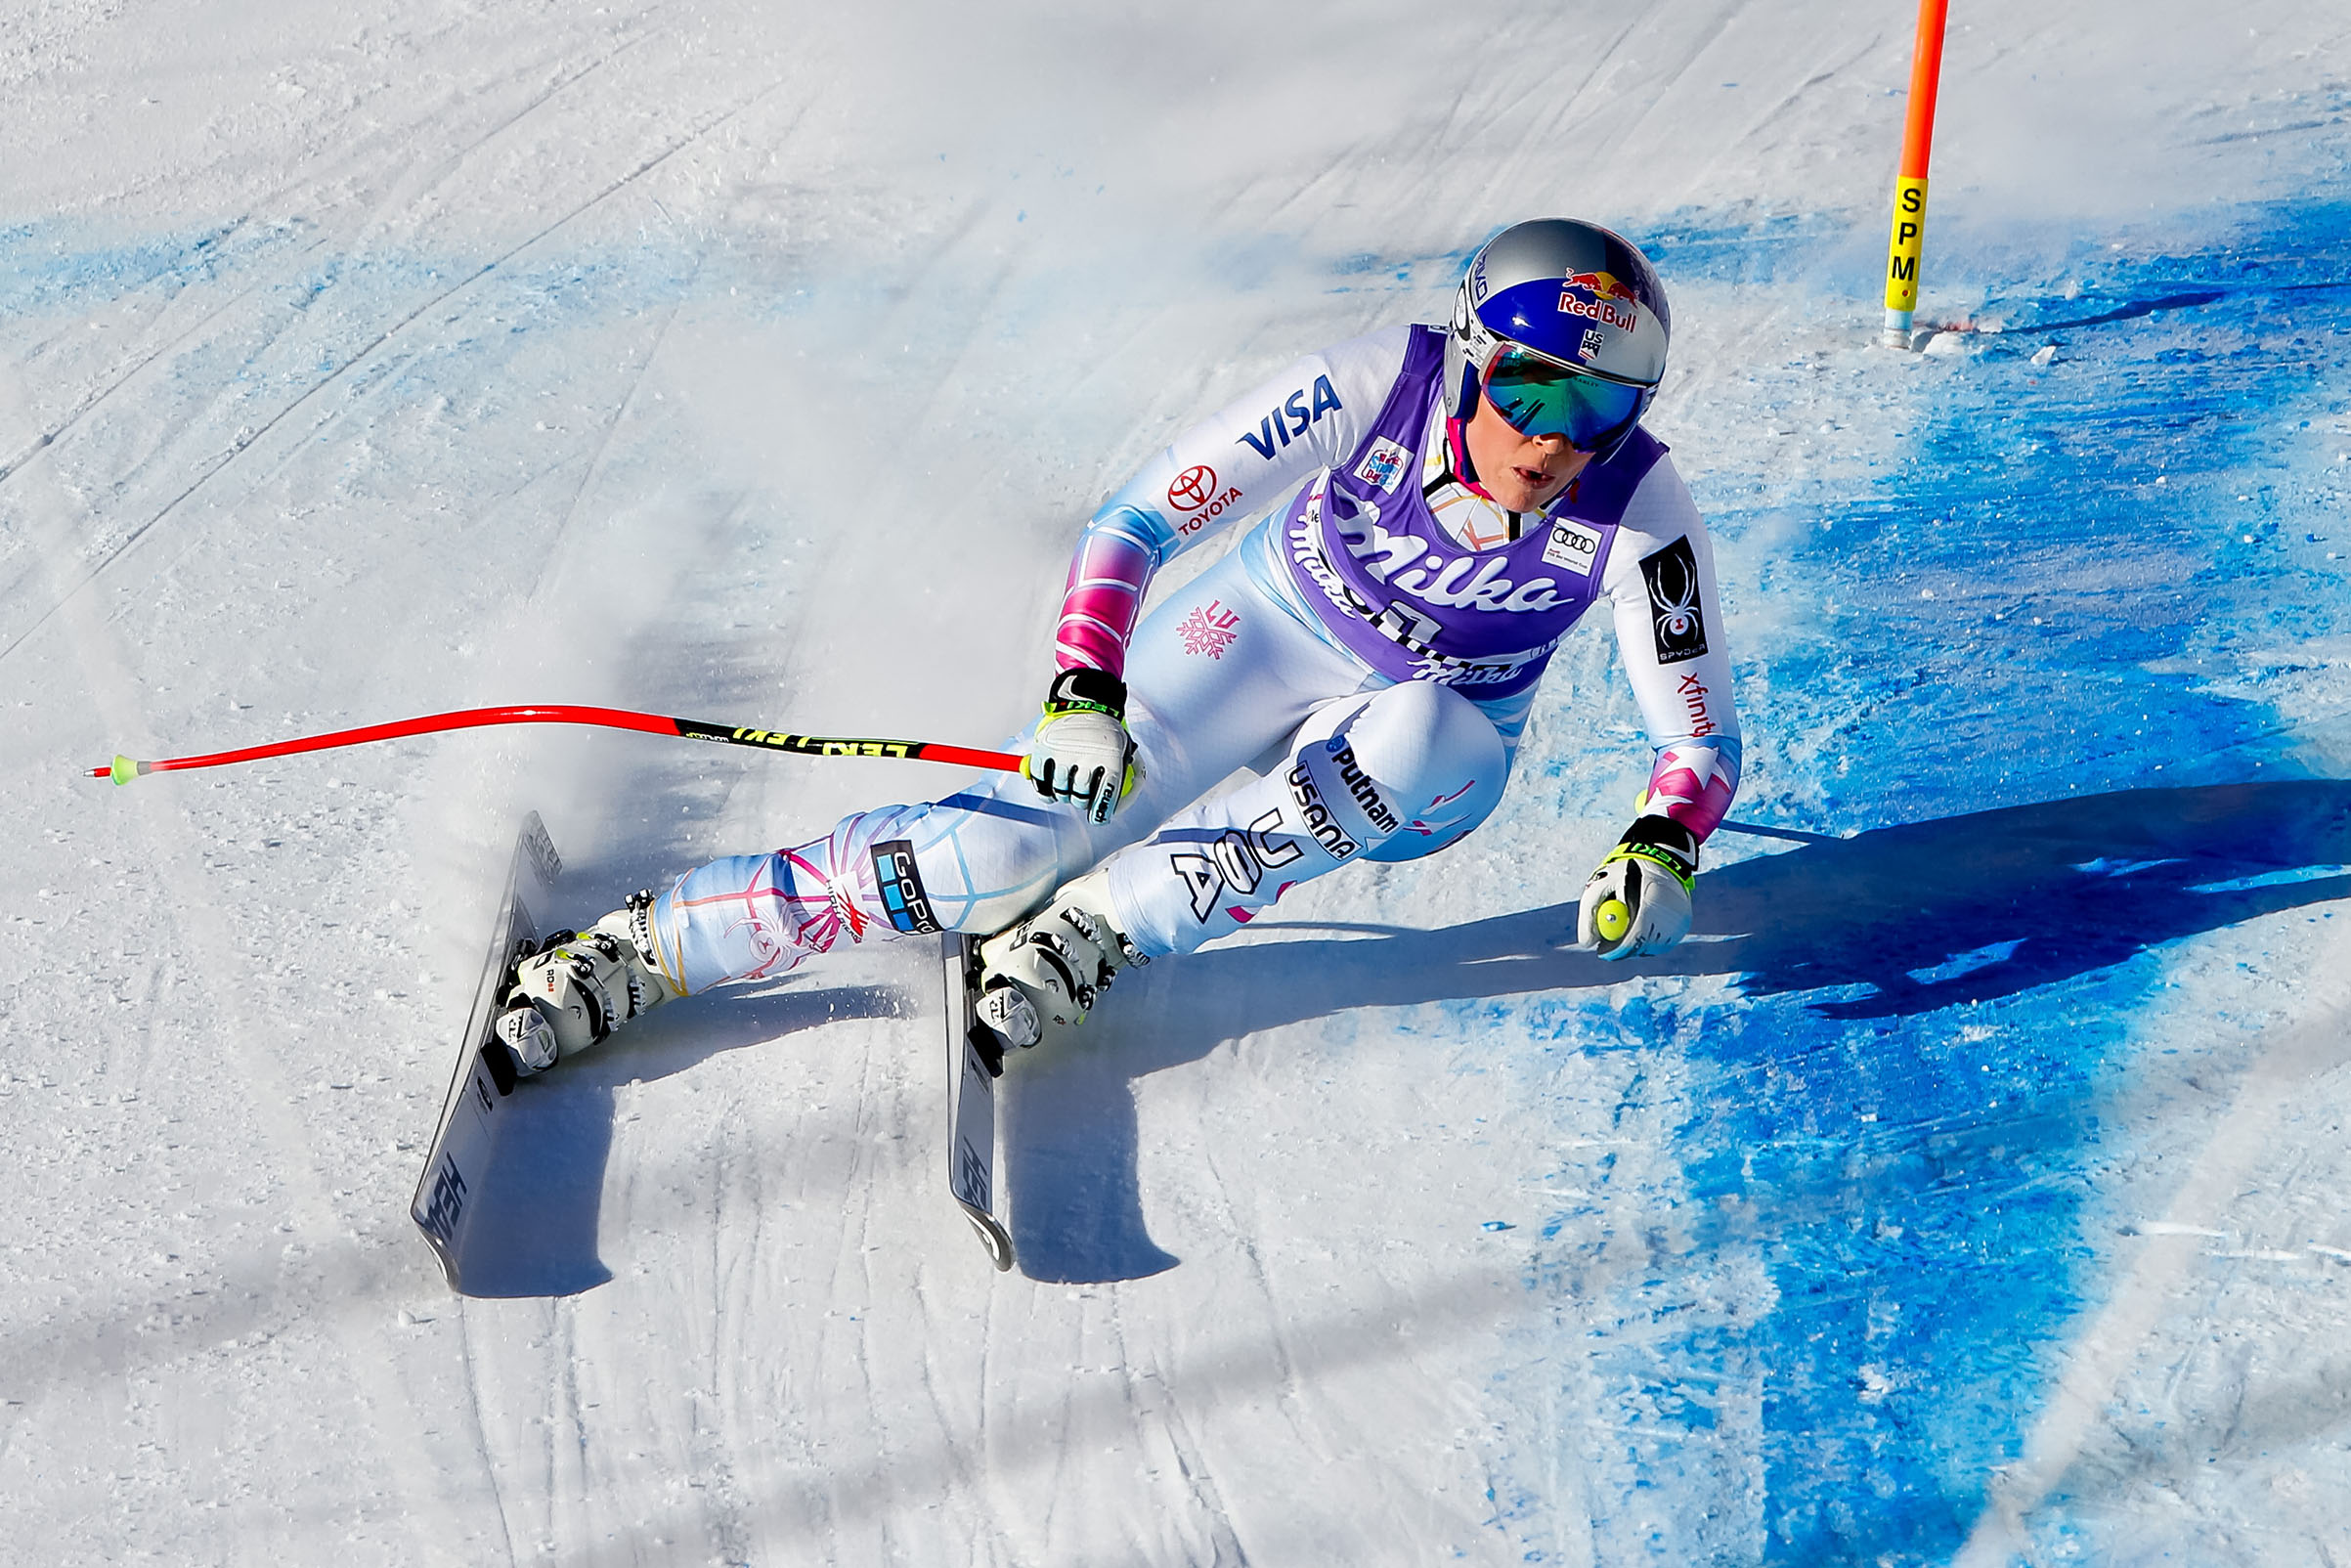 Lindsey Vonn of USA competes during the Audi FIS Alpine Ski World Cup Women's Downhill in Cortina d'Ampezzo, Italy, on Jan. 20, 2018. (Christophe Pallot—Agence Zoom/Getty Images)